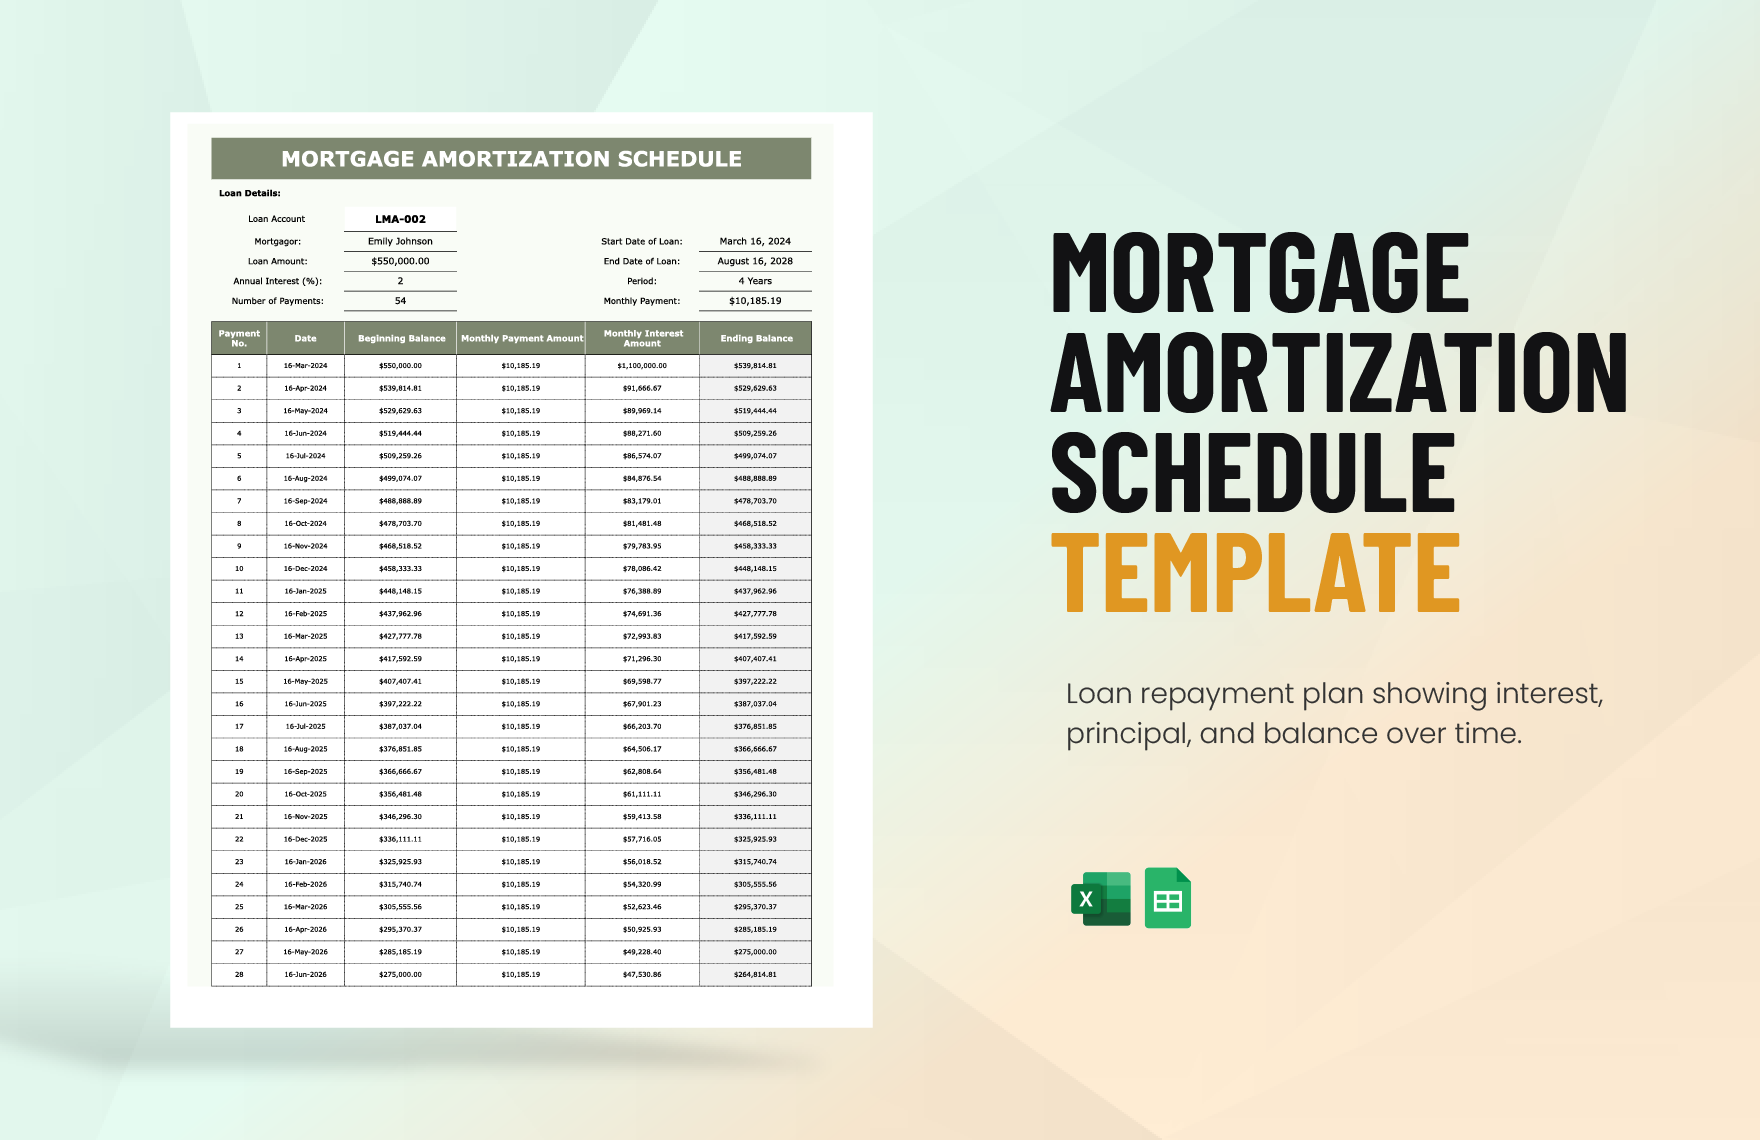 Mortgage Amortization Schedule Template in Excel, Google Sheets